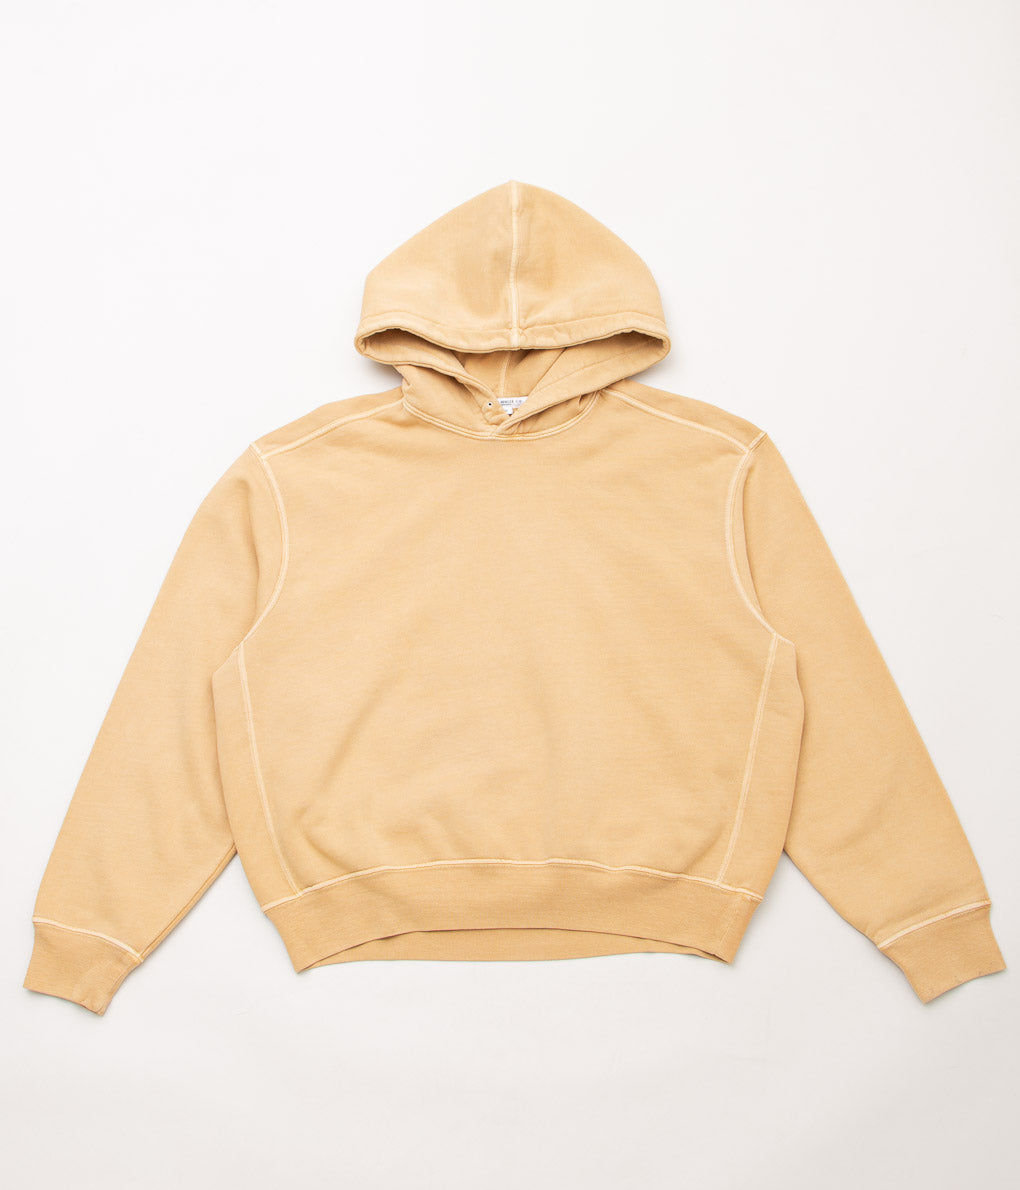 LADY WHITE CO. "MINI HOODIE"(MUSTERD PIGMENT)